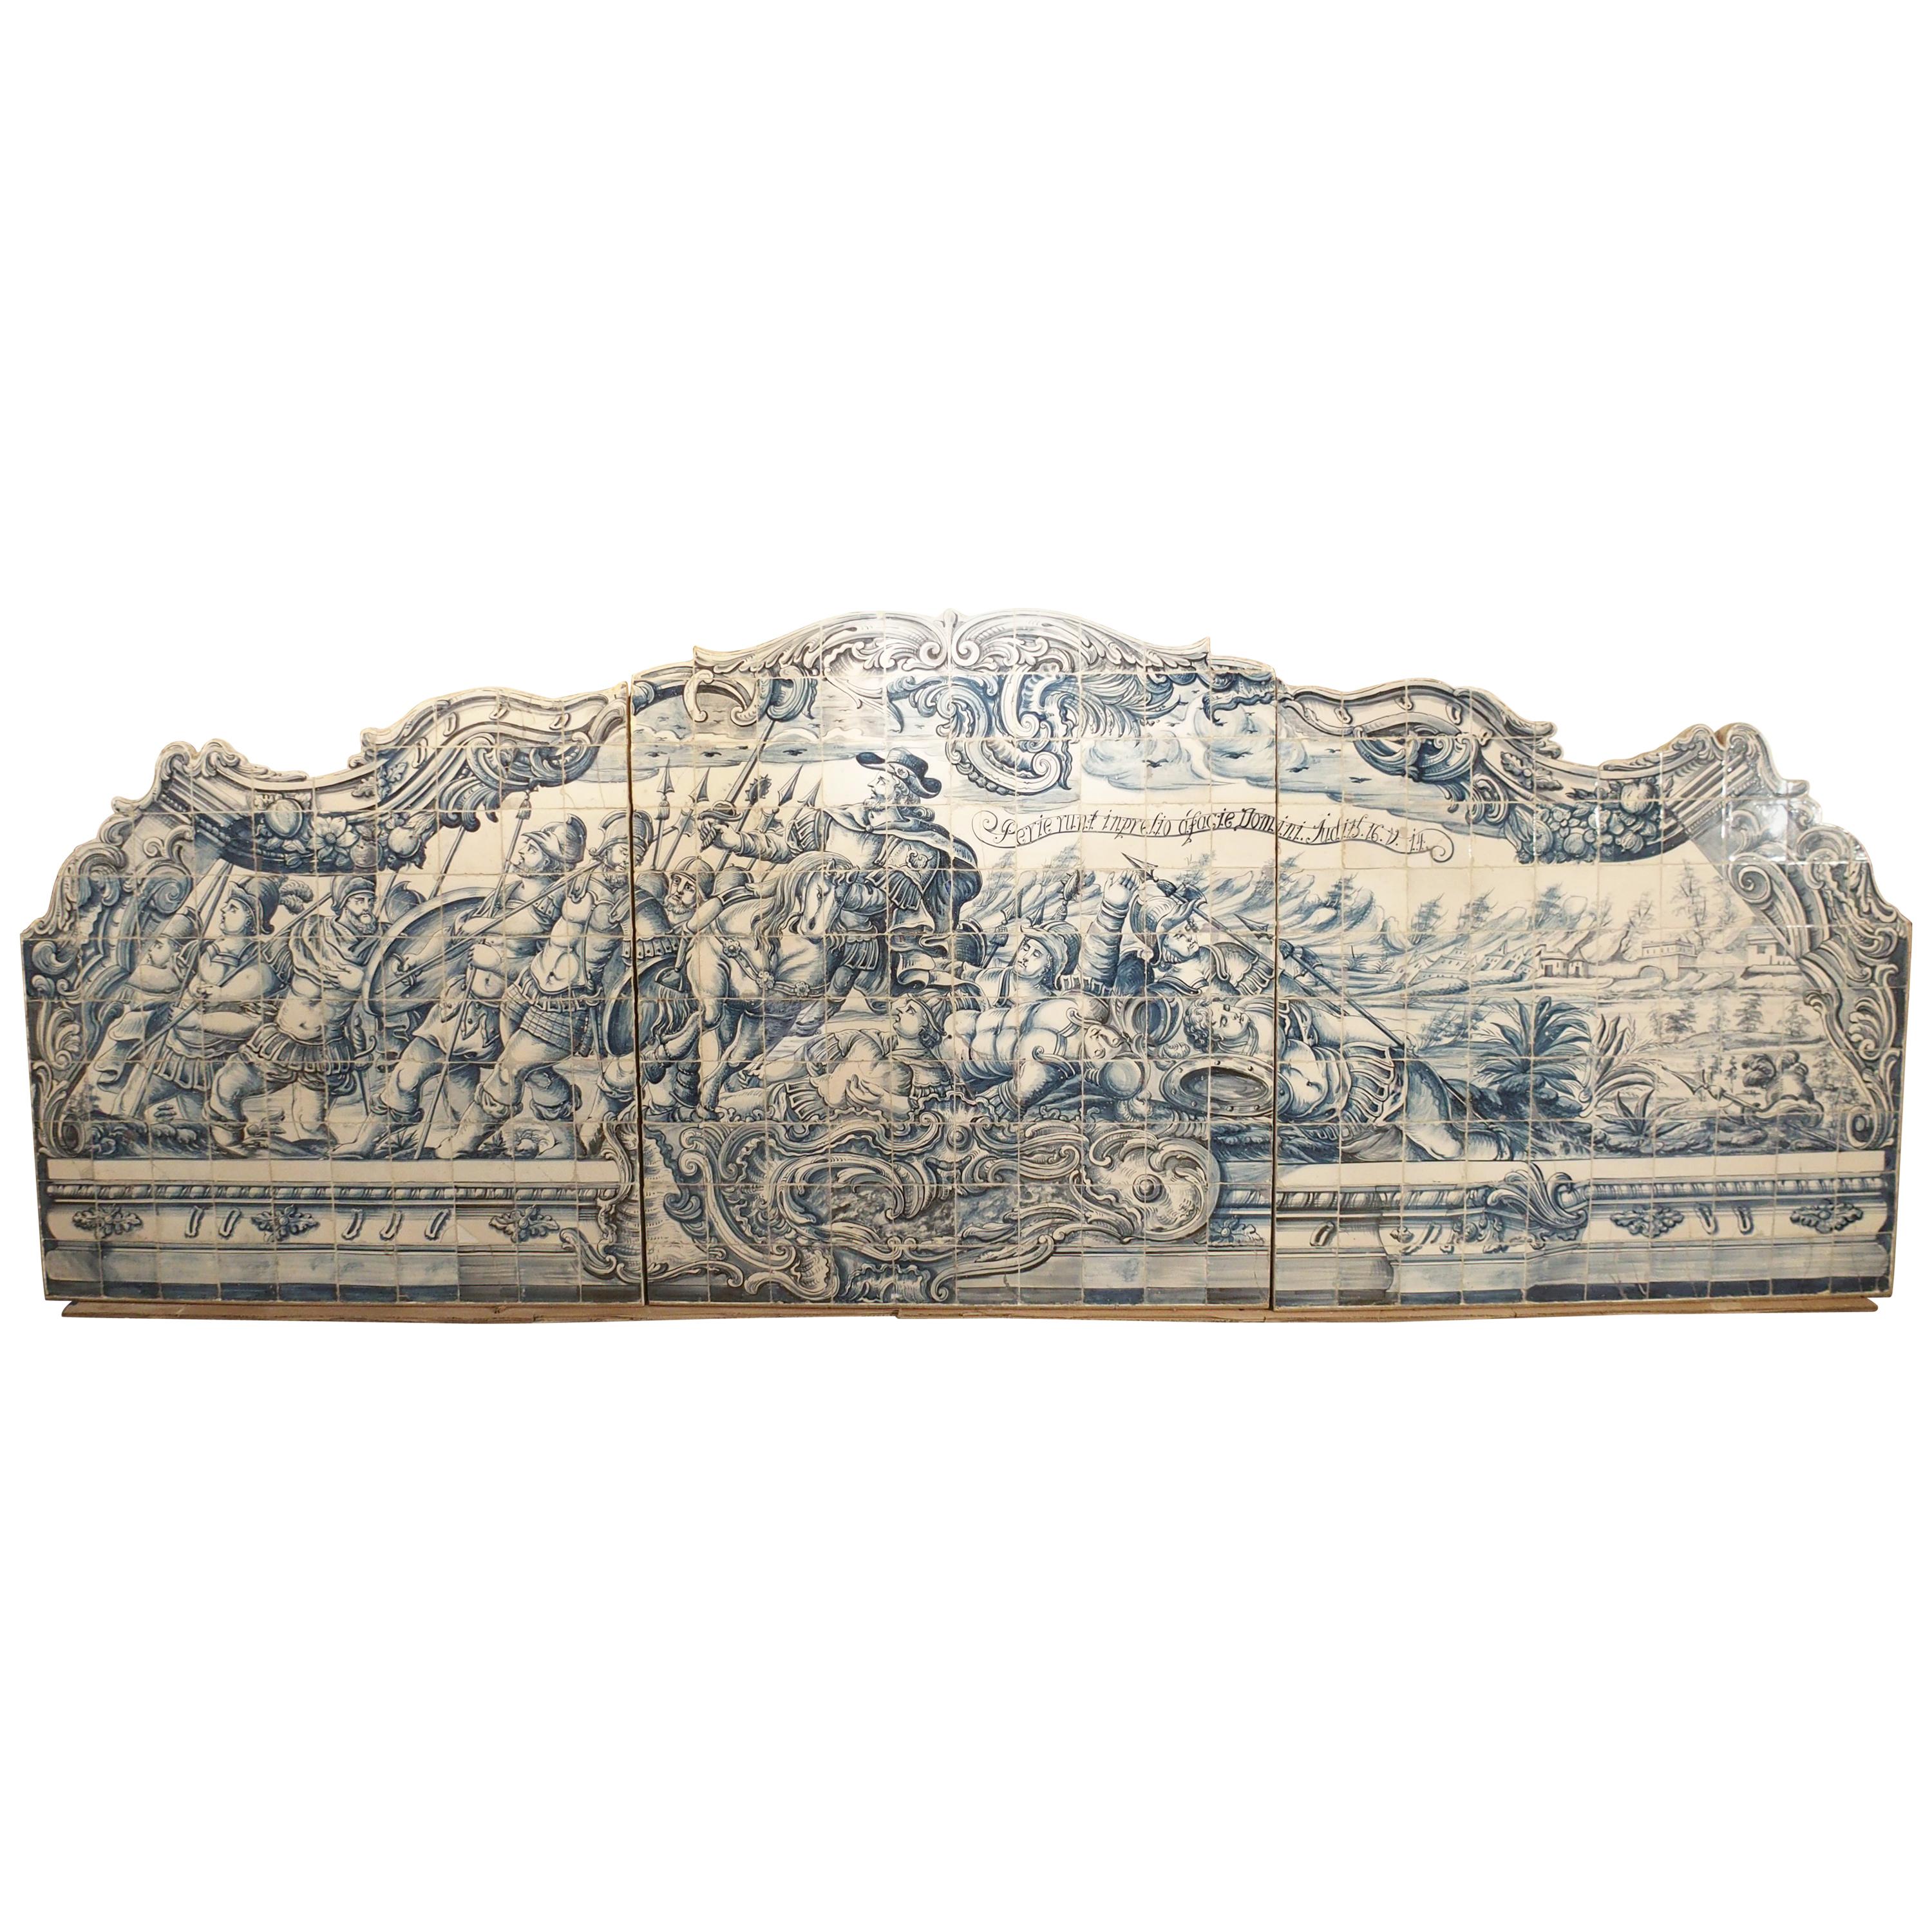 Monumental 3-Piece 18th Century Azulejo Mural Panel from Portugal For Sale